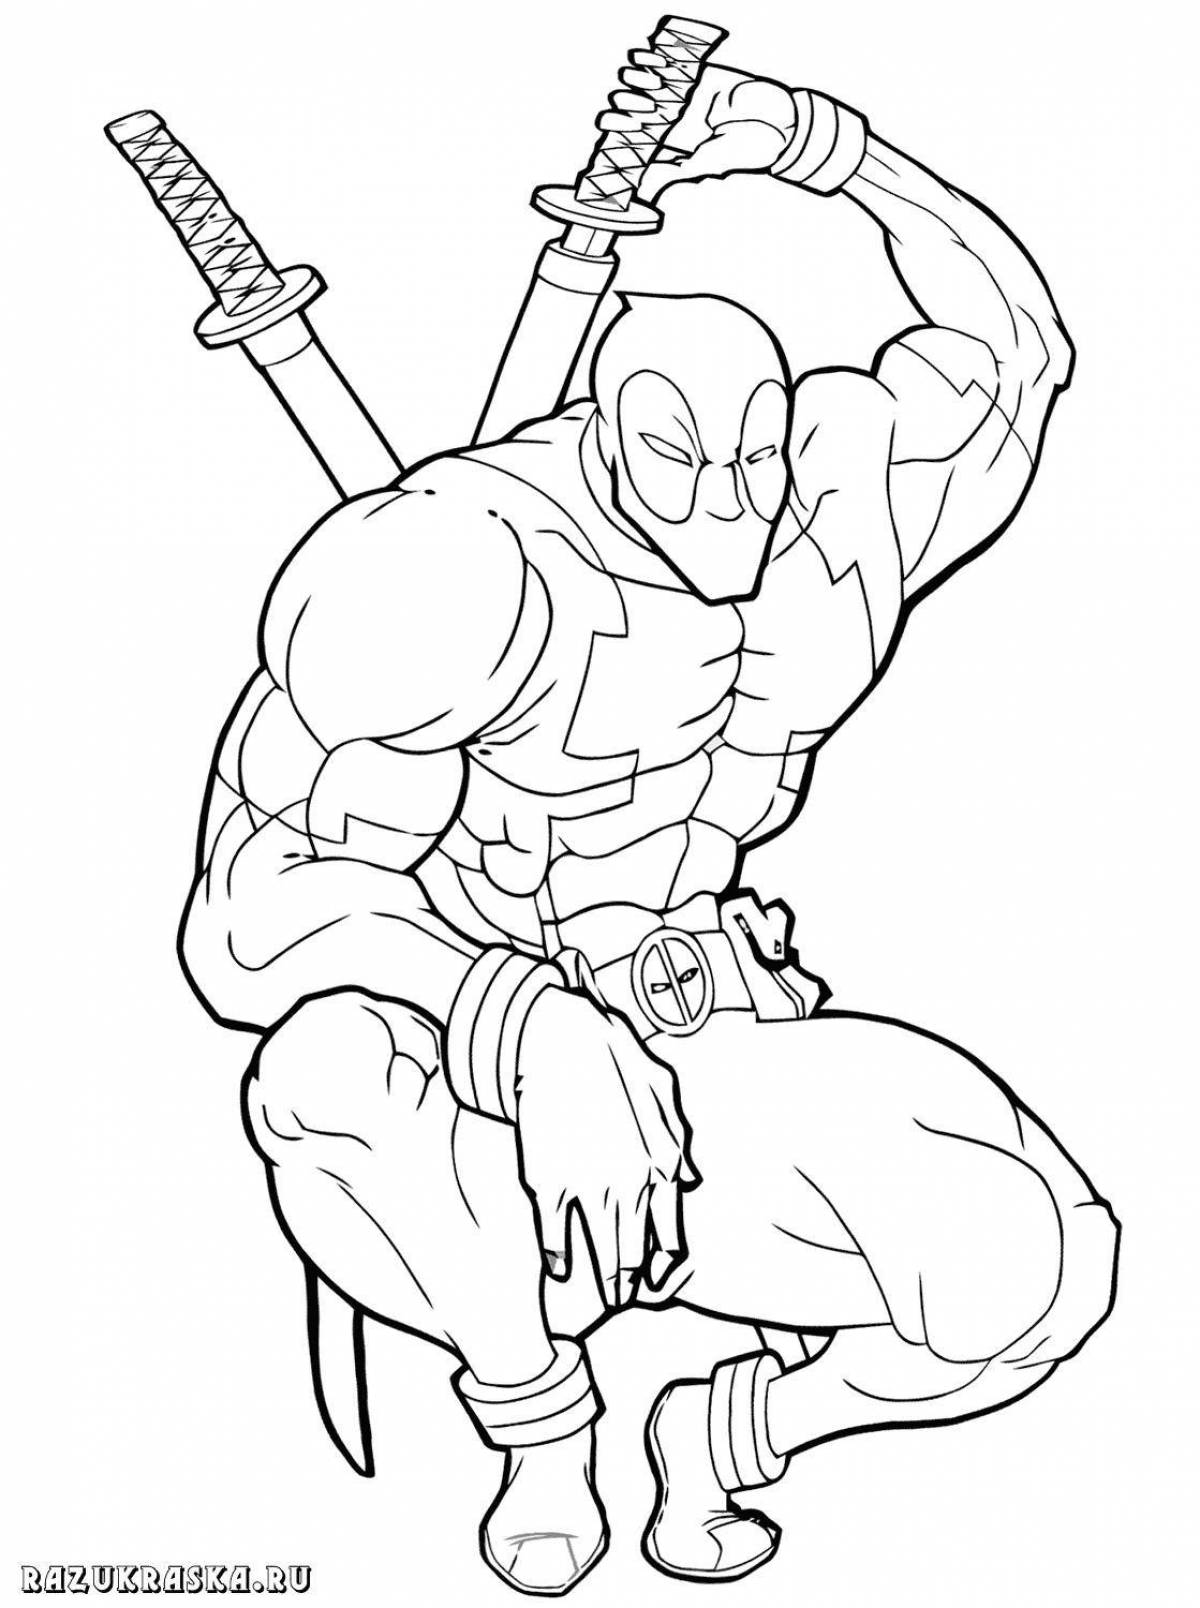 Fantastic coloring book for kids deadpool and spiderman